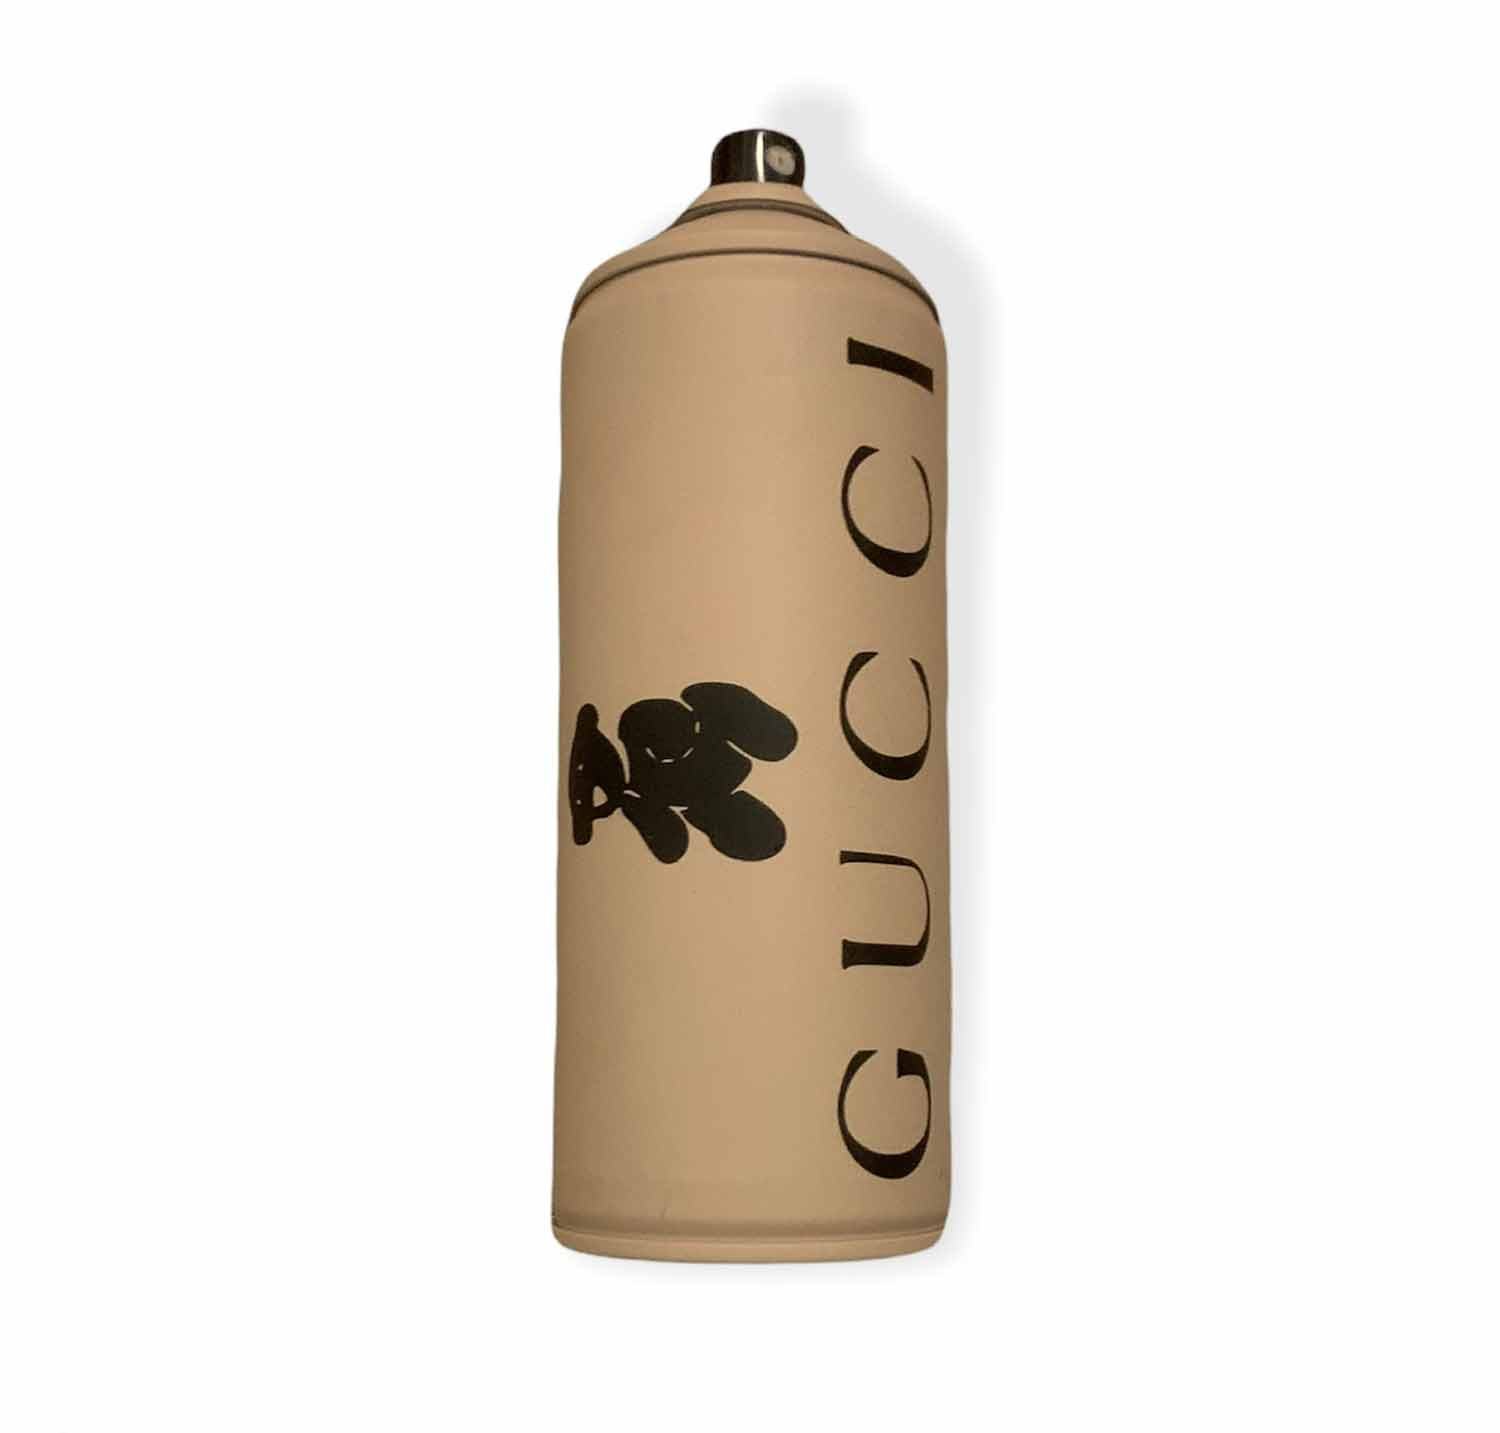 Gucci Water Bottles 